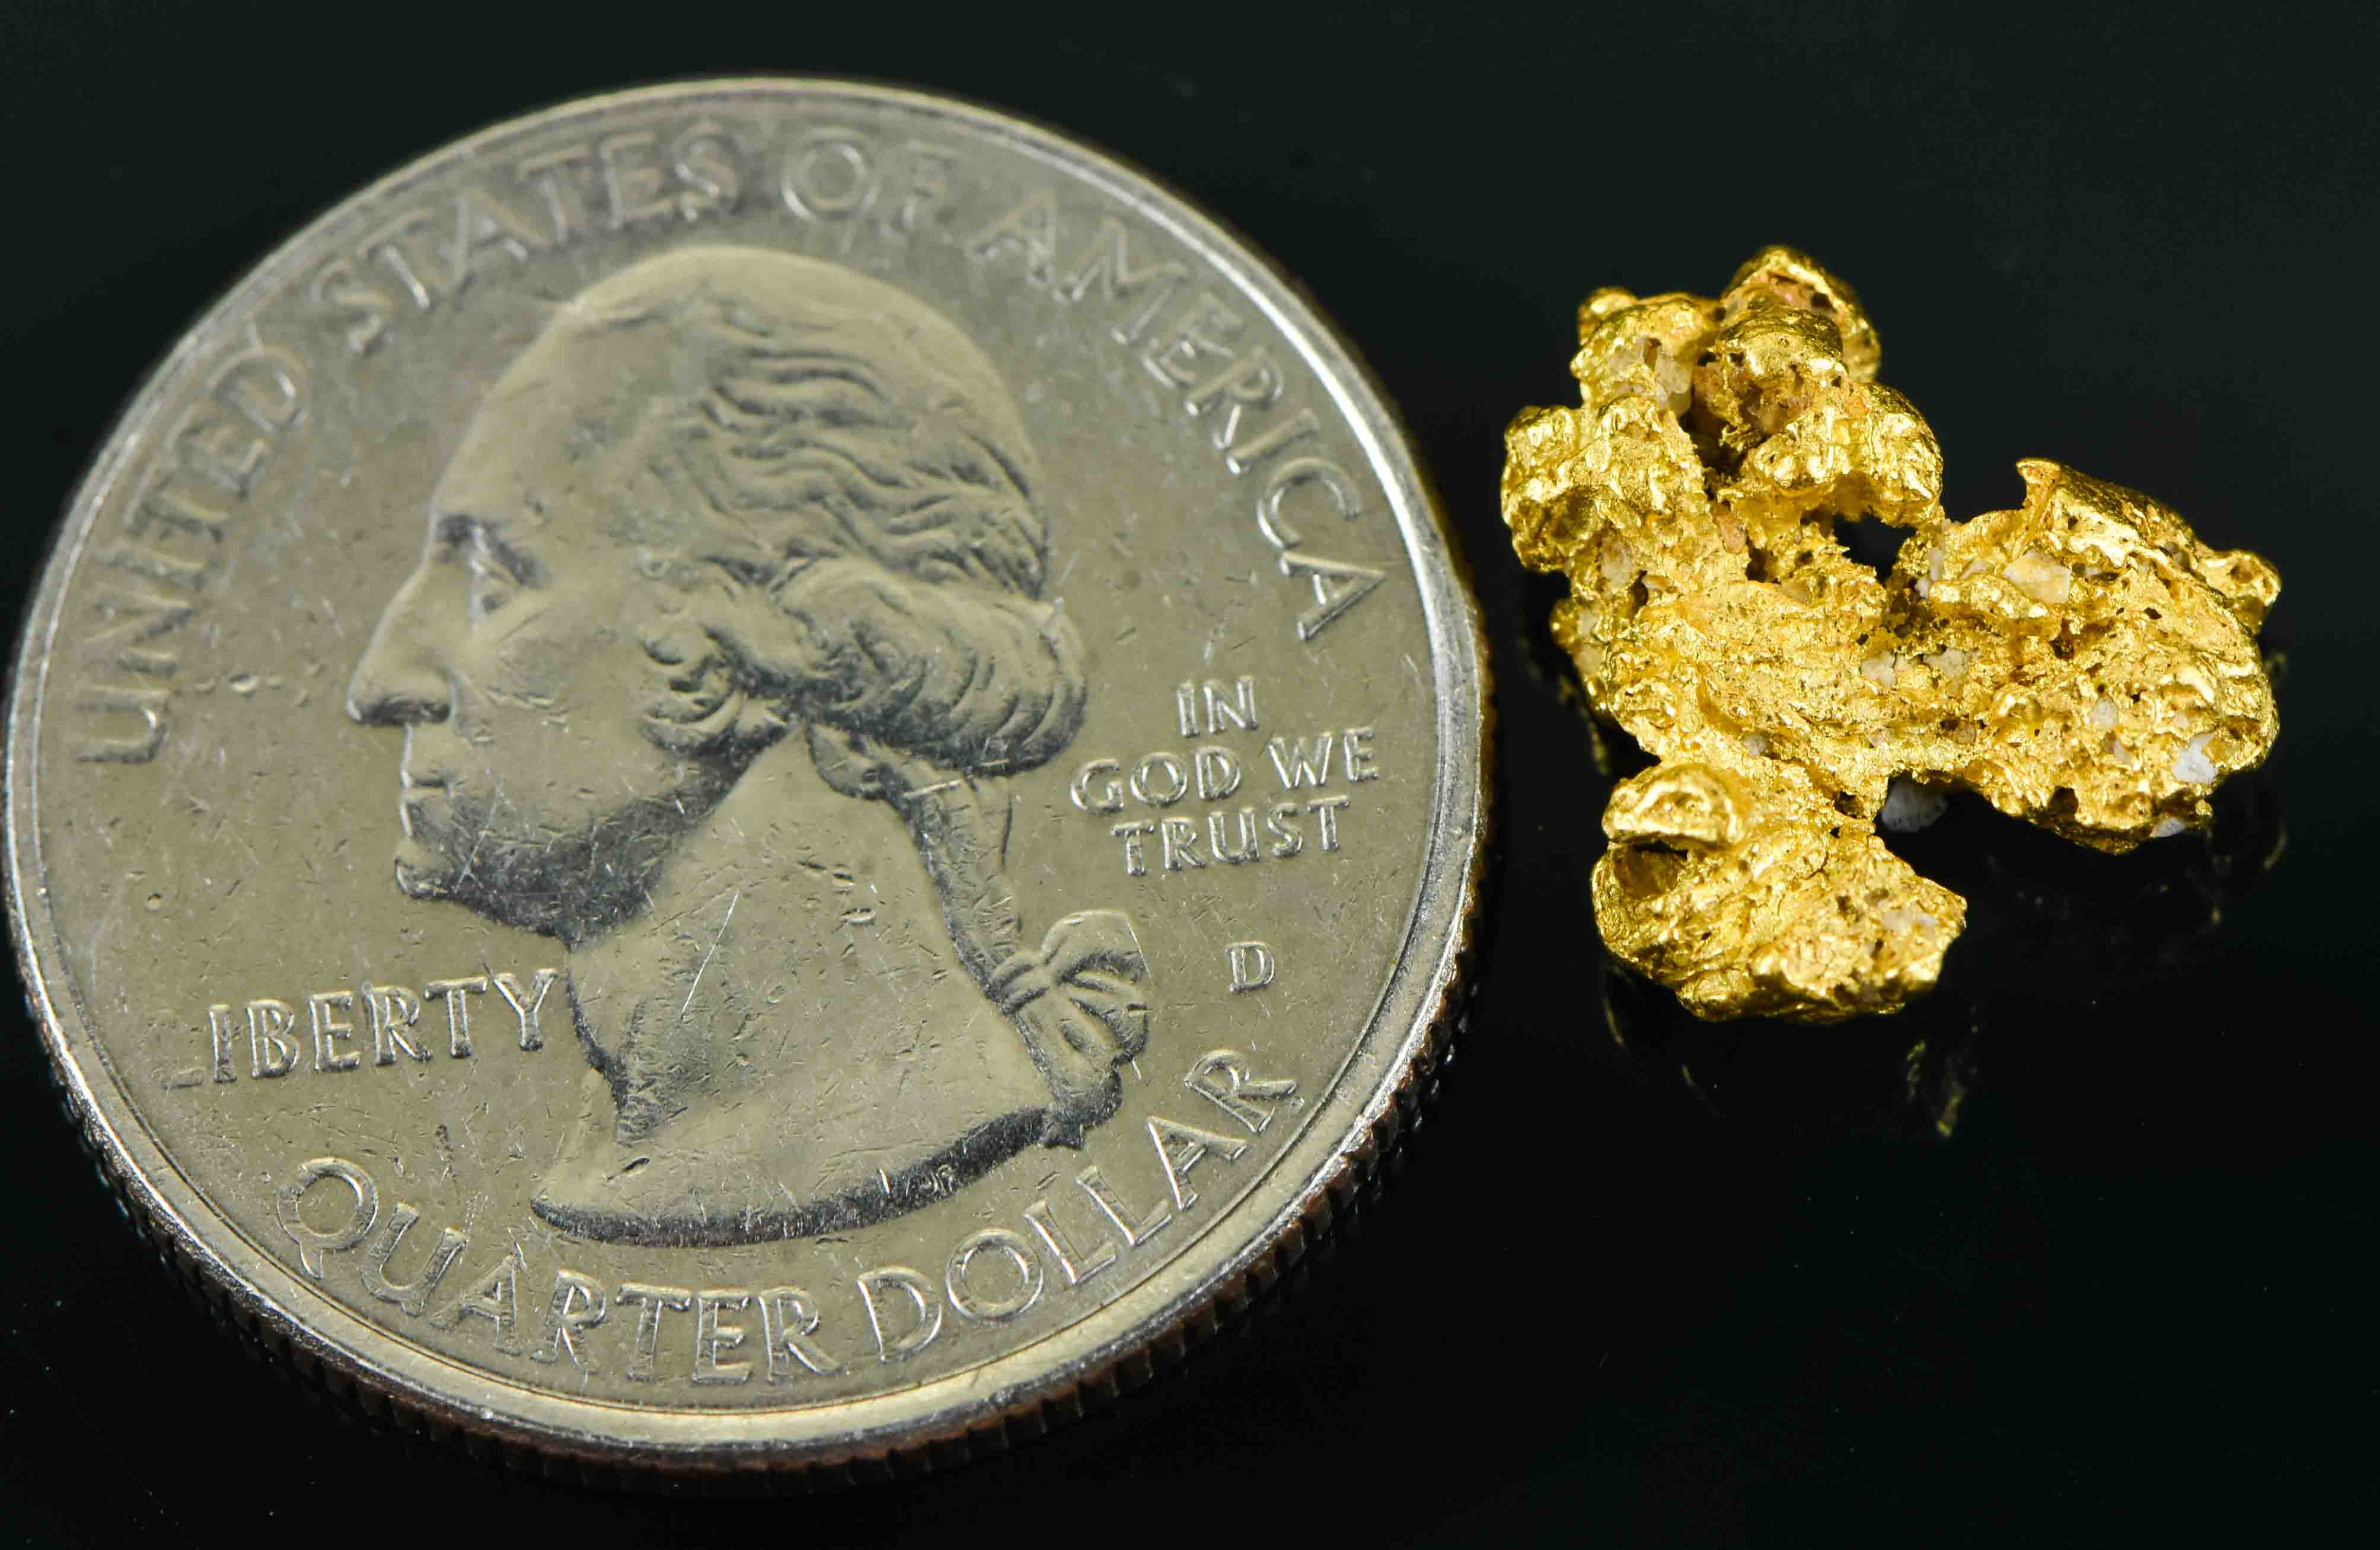 #24 Australian Natural Gold Nugget With Quartz Weighs 2.19 Grams.